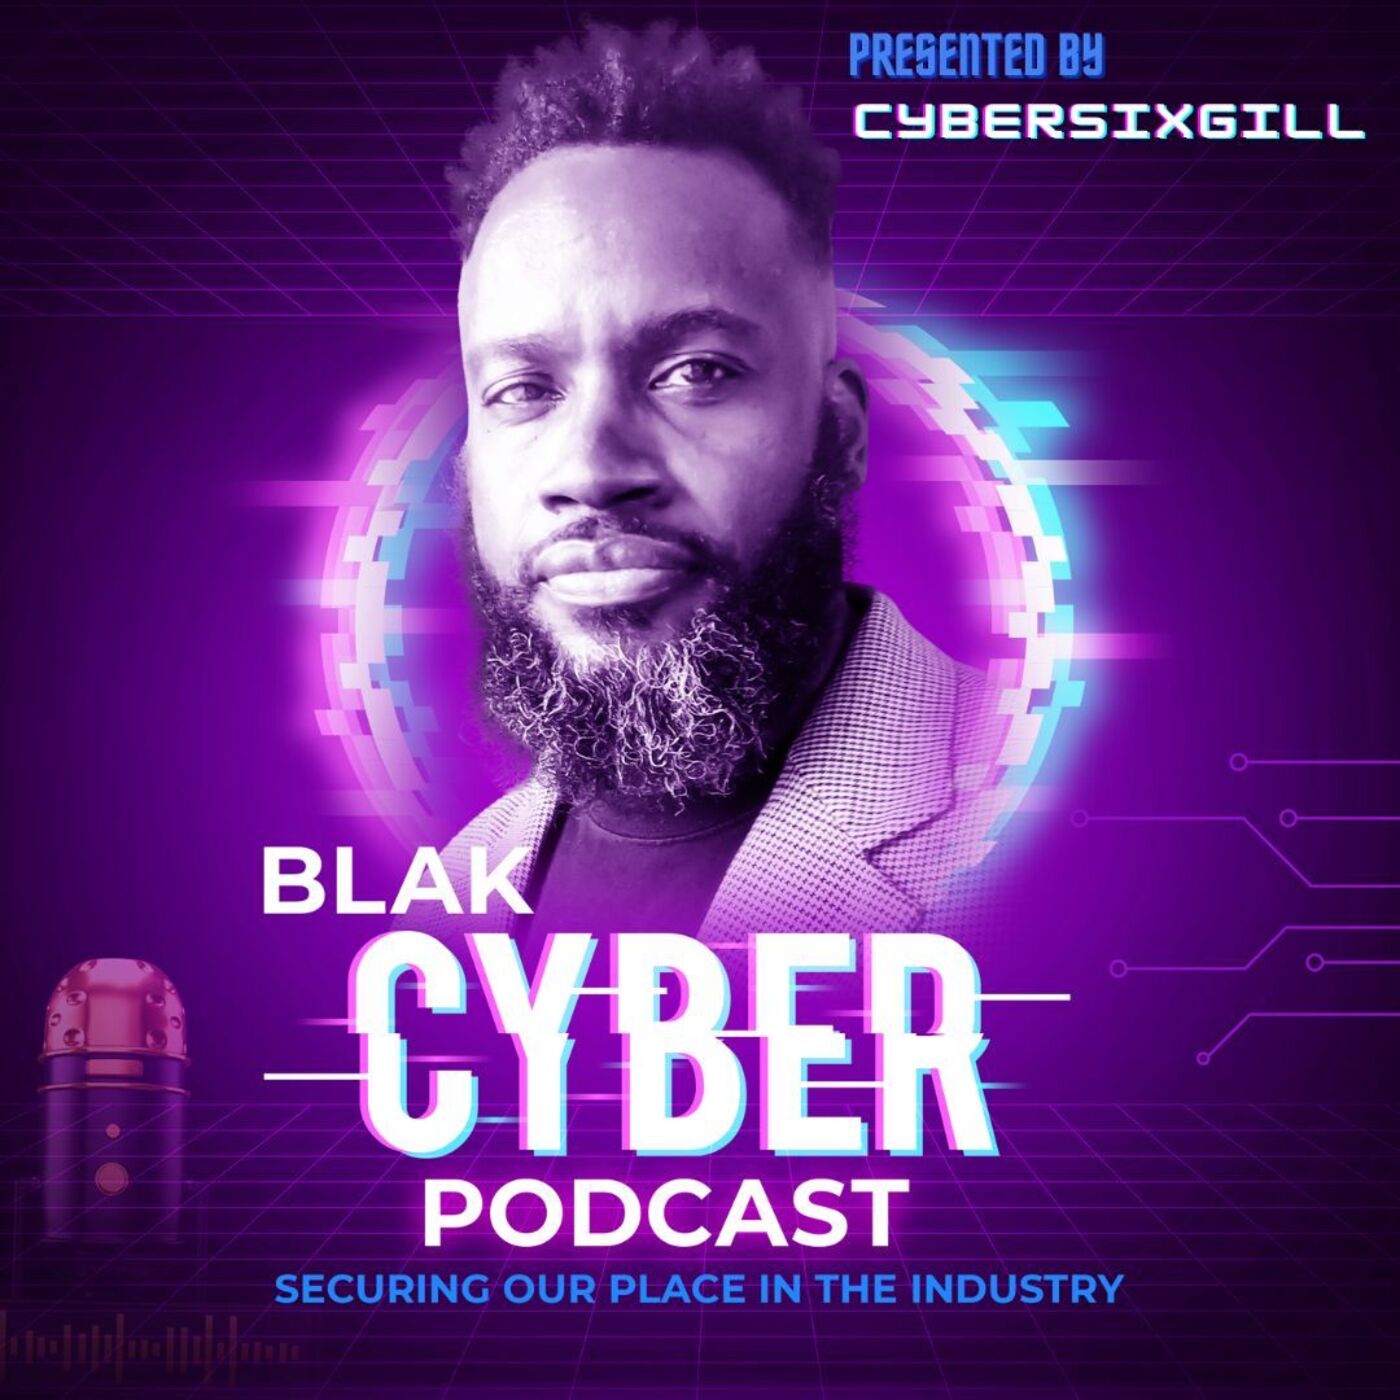 Blak Cyber Podcast: Interview with Michael Echols